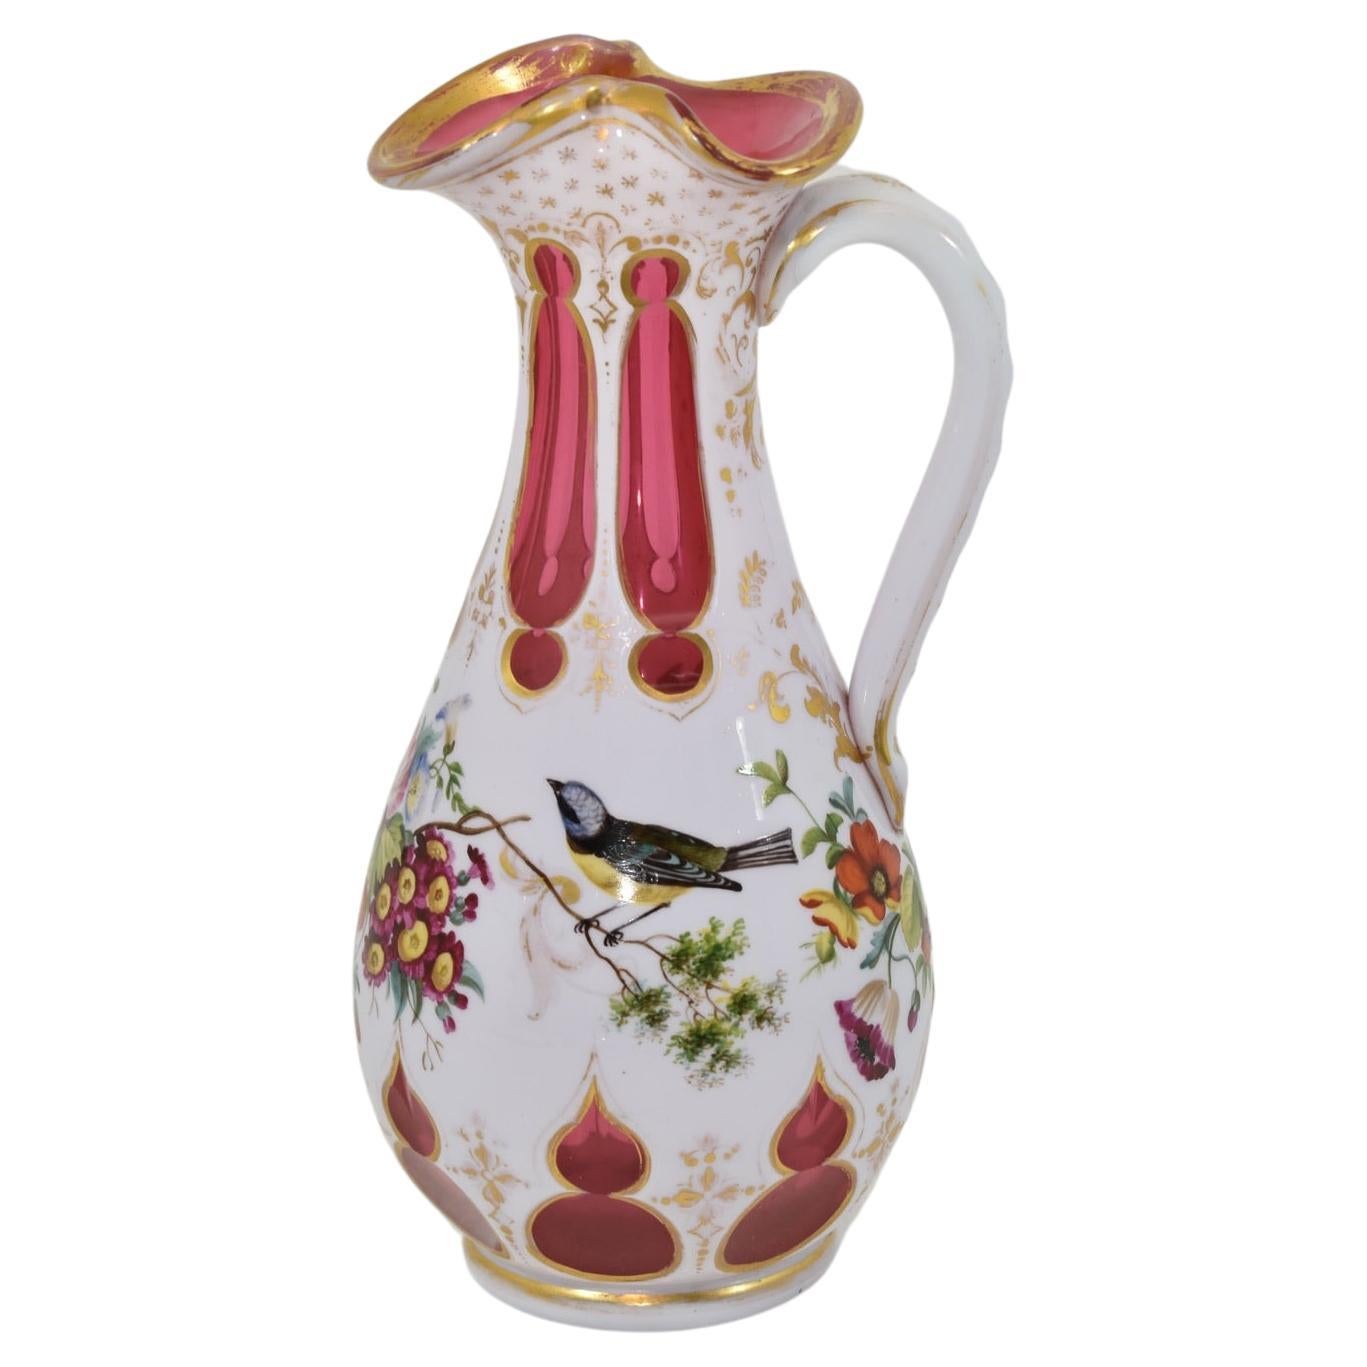 Antique Bohemian Ruby Red Overlay Glass Ewer, Jug, Pitcher, 19th Century For Sale 1